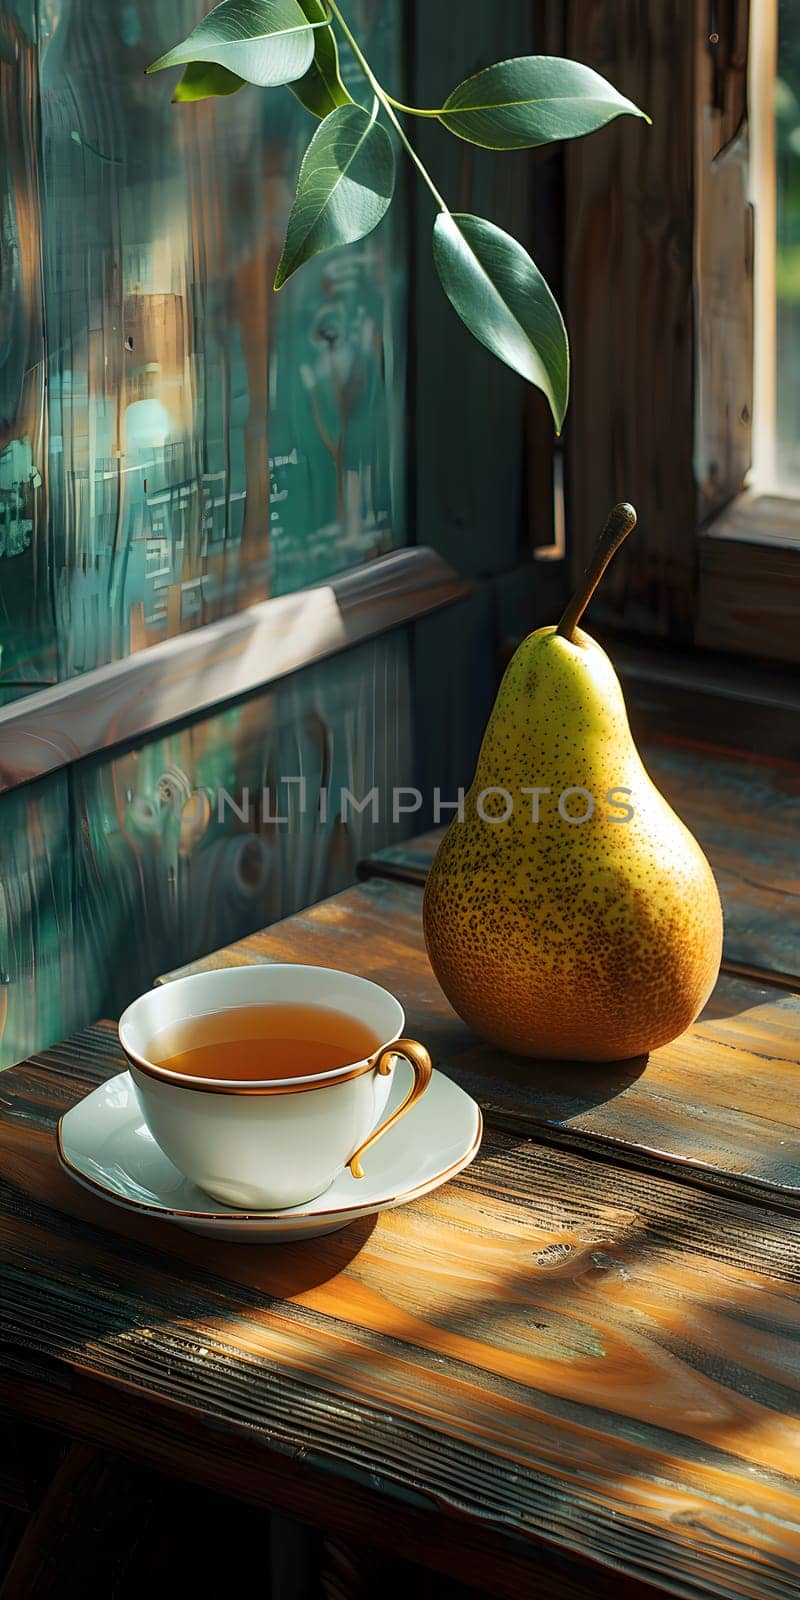 A cup of tea and a ripe pear sit on a wooden table, creating a cozy scene with elements of drinkware, food, and wood. The simple yet elegant setting evokes a sense of warmth and comfort